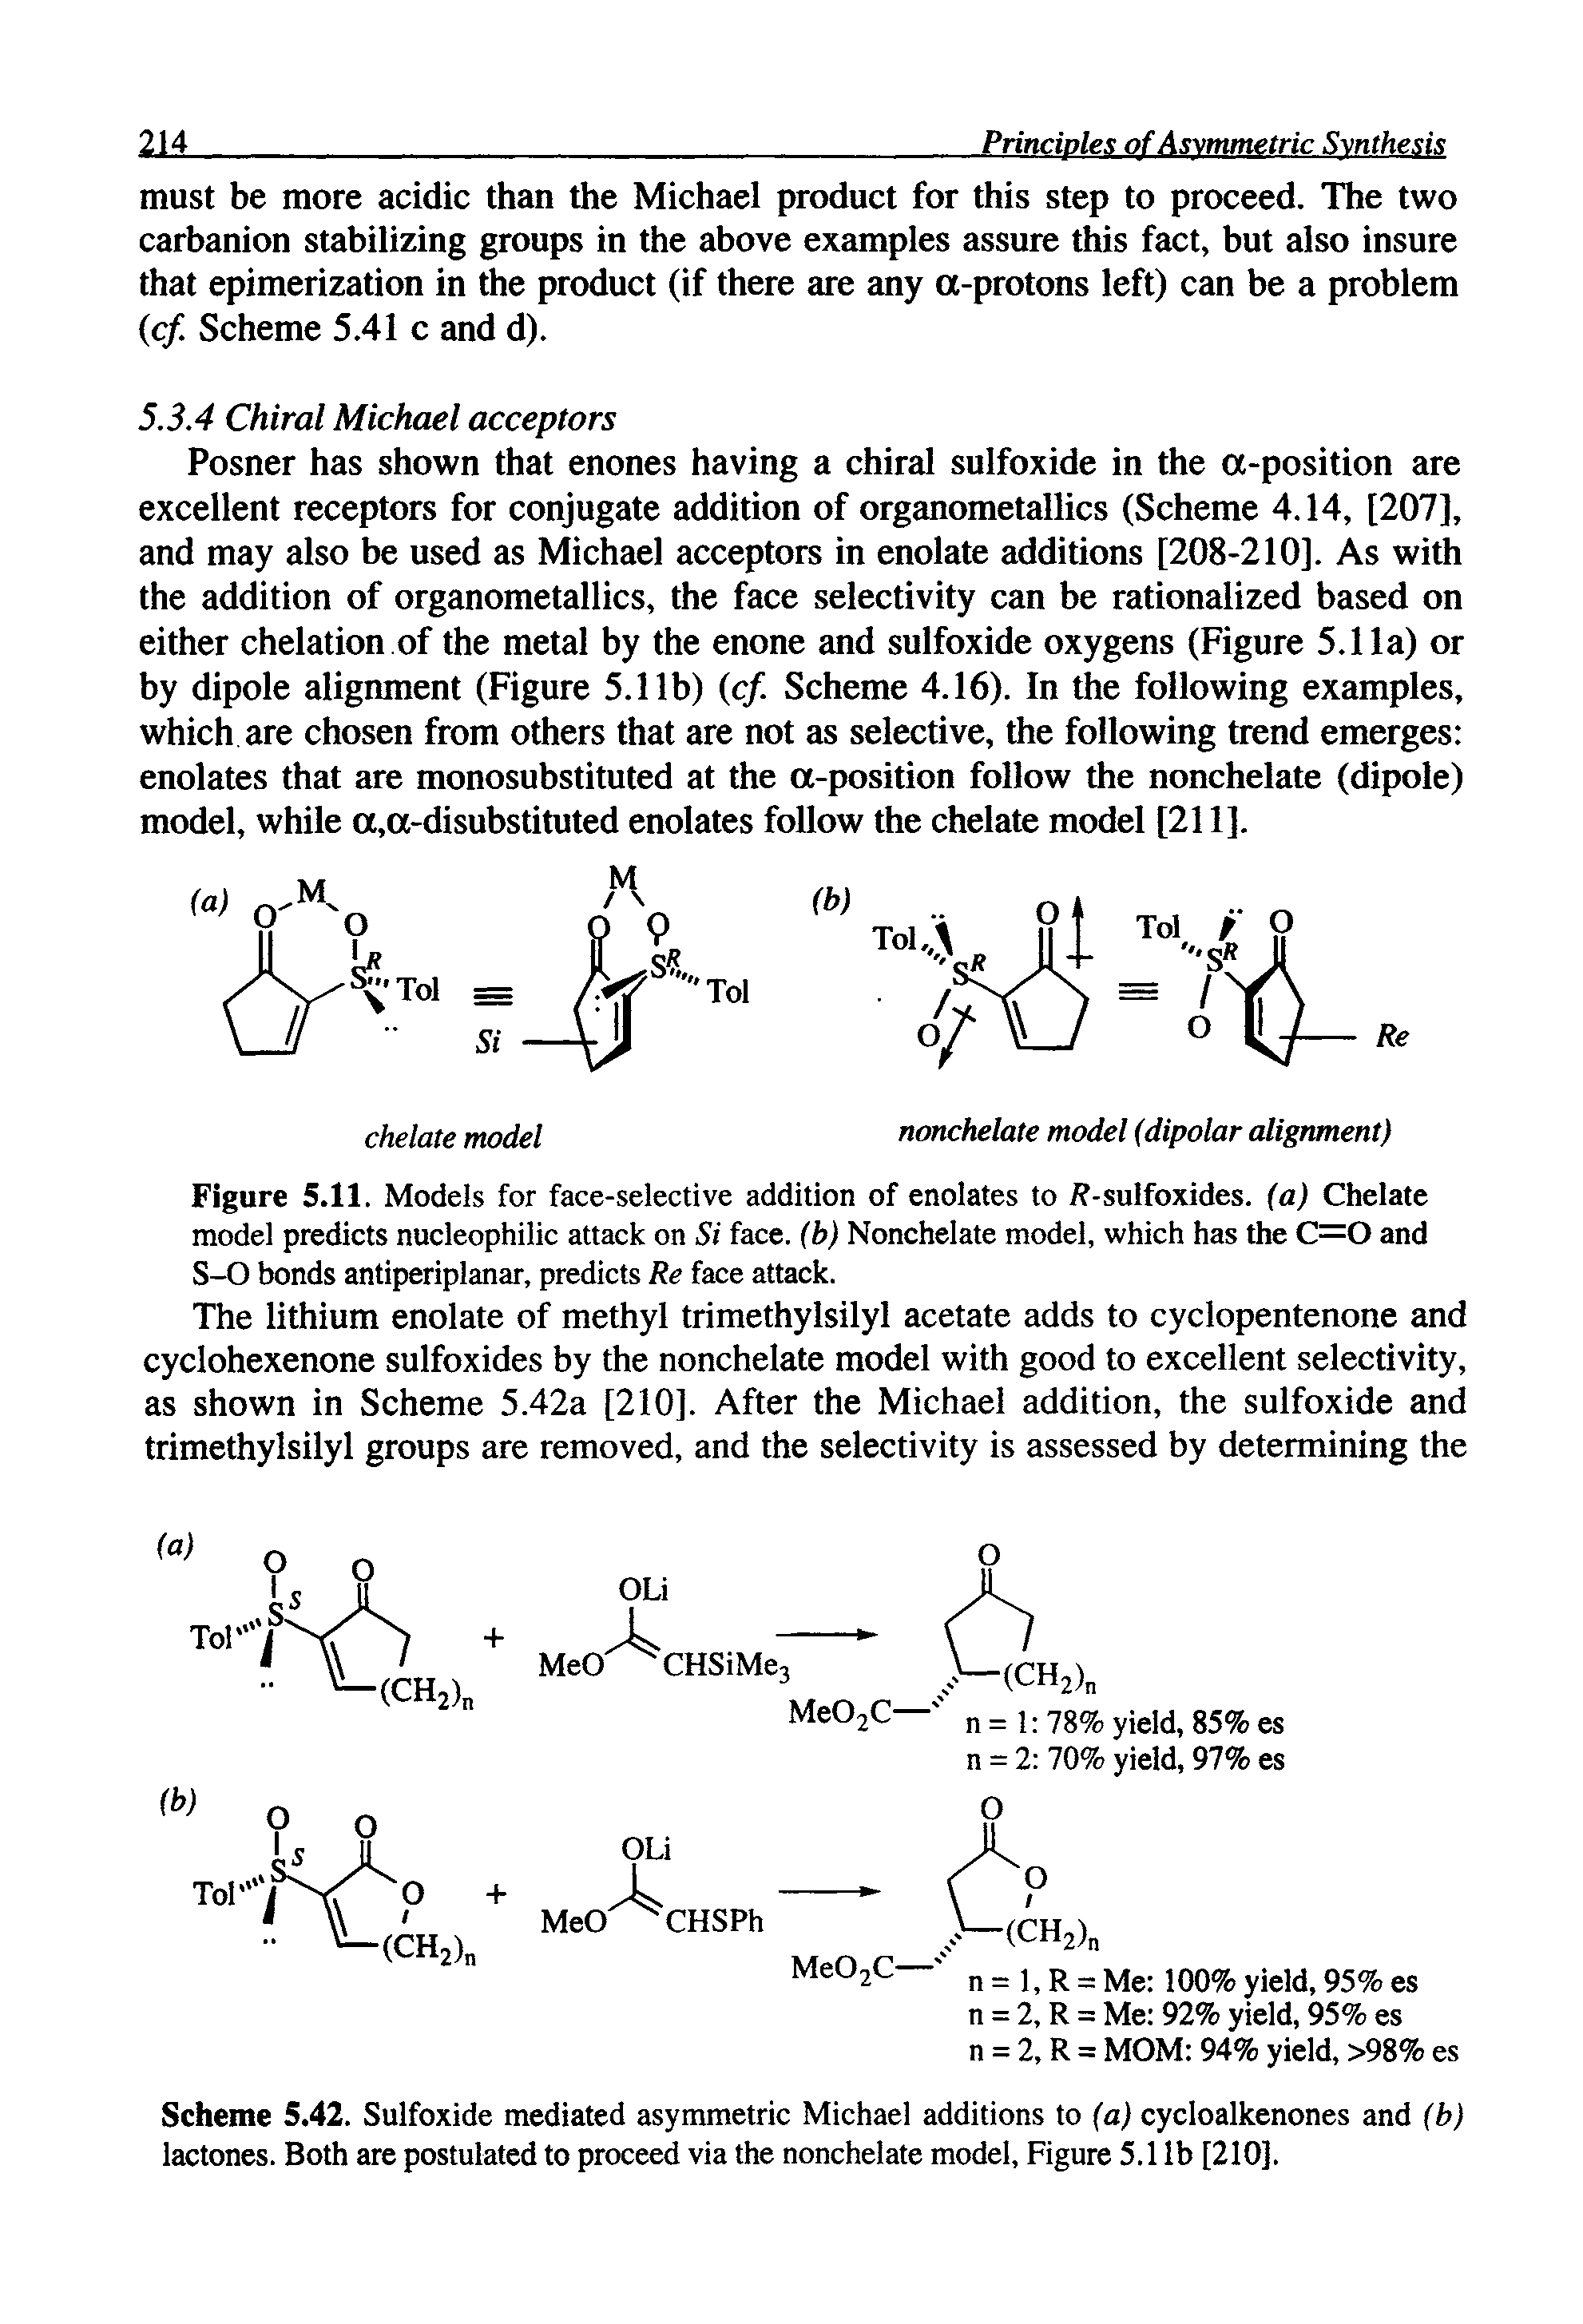 Figure 5.11. Models for face-selective addition of enolates to i -sulfoxides, (a) Chelate model predicts nucleophilic attack on Si face, (b) Nonchelate model, which has the C=0 and S-O bonds antiperiplanar, predicts Re face attack.